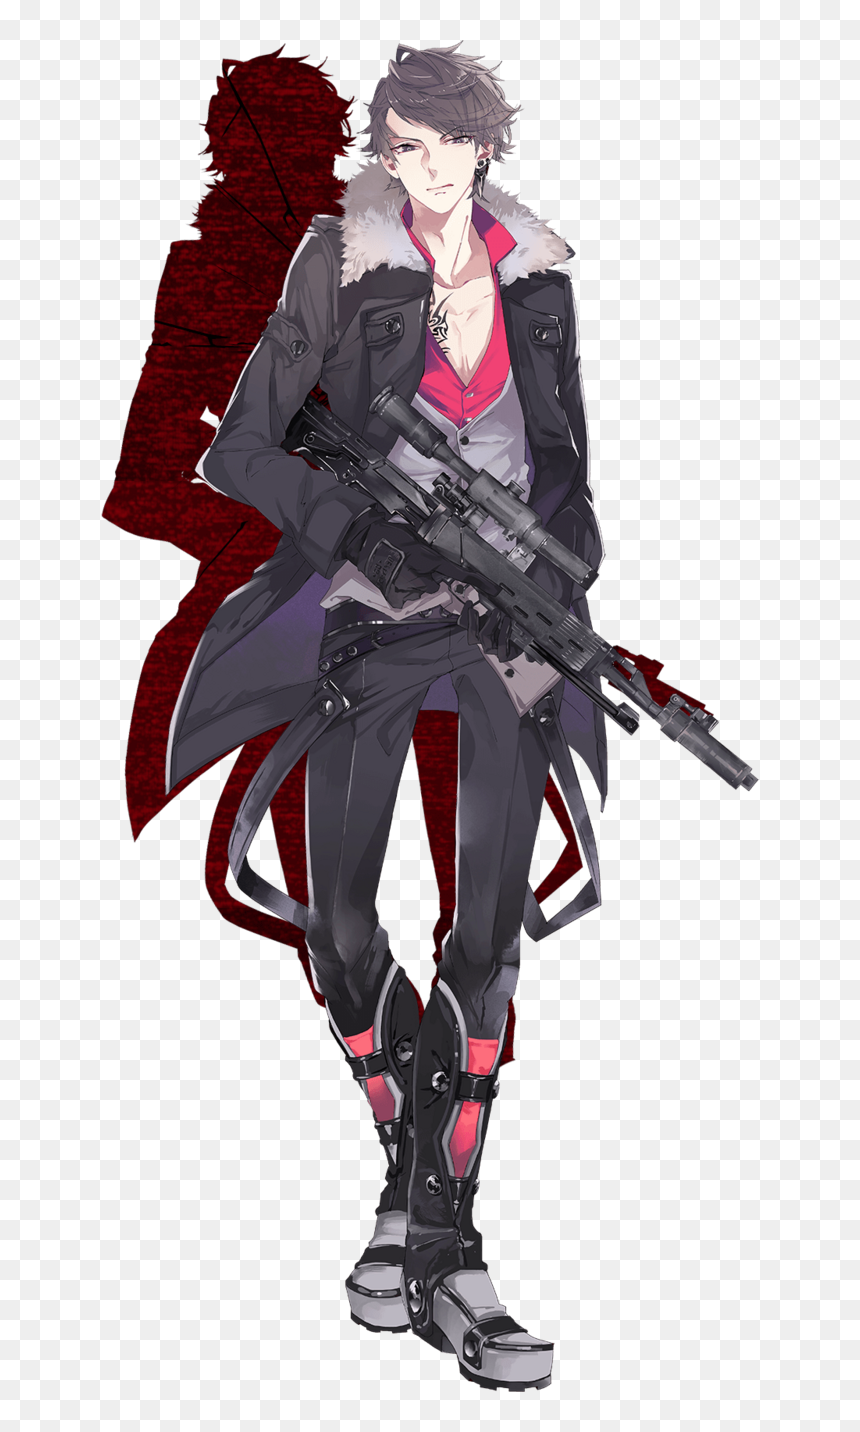 426-4267560_anime-guy-holding-a-gun-anime-boy-with.png